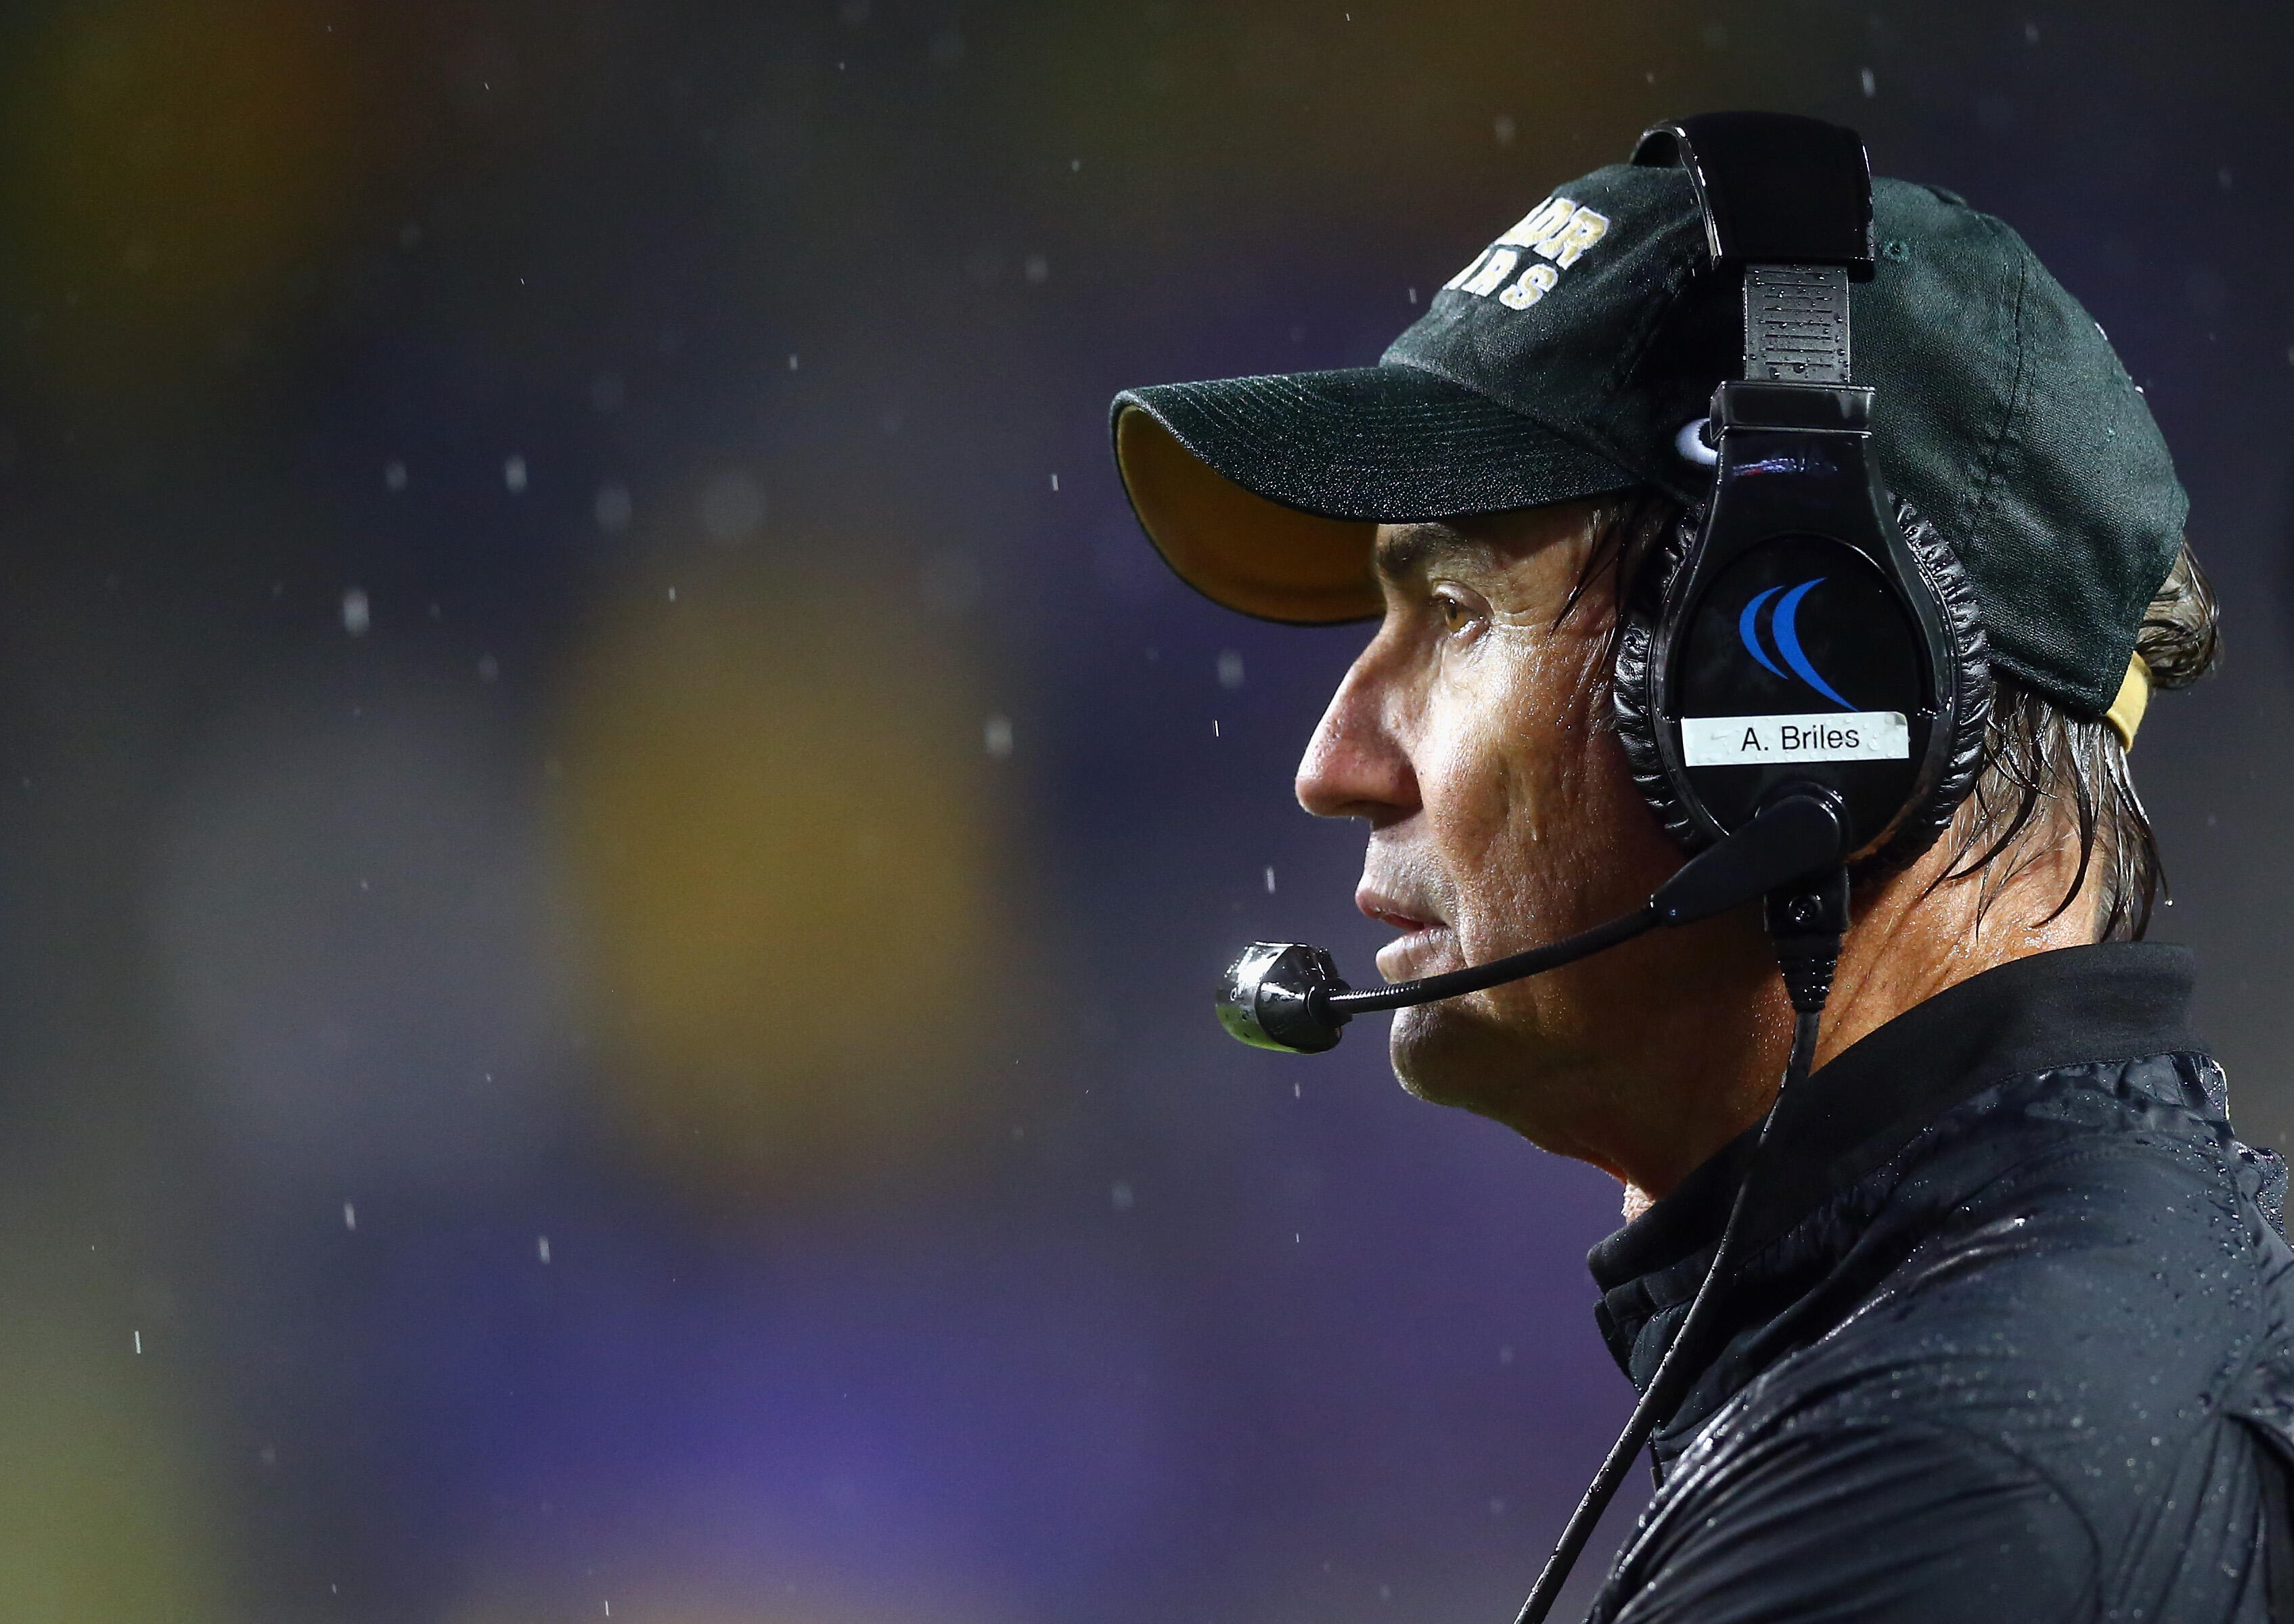 FORT WORTH, TX - NOVEMBER 27:  Head coach Art Briles of the Baylor Bears during the second half against the TCU Horned Frogs at Amon G. Carter Stadium on November 27, 2015 in Fort Worth, Texas.  (Photo by Ronald Martinez/Getty Images)